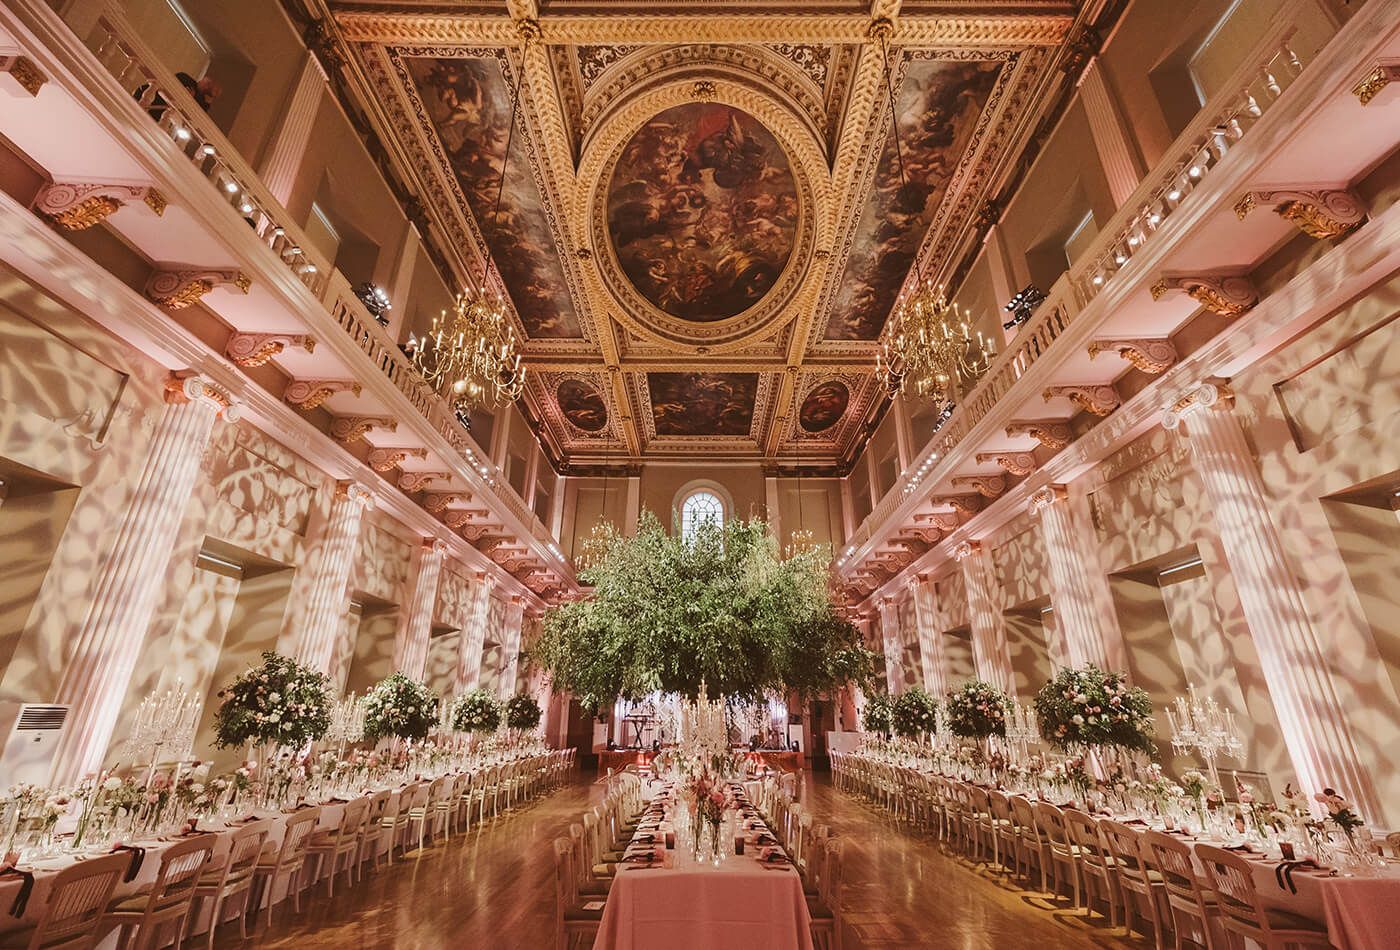 Pink floral wedding set up in large grand room with ceiling mural